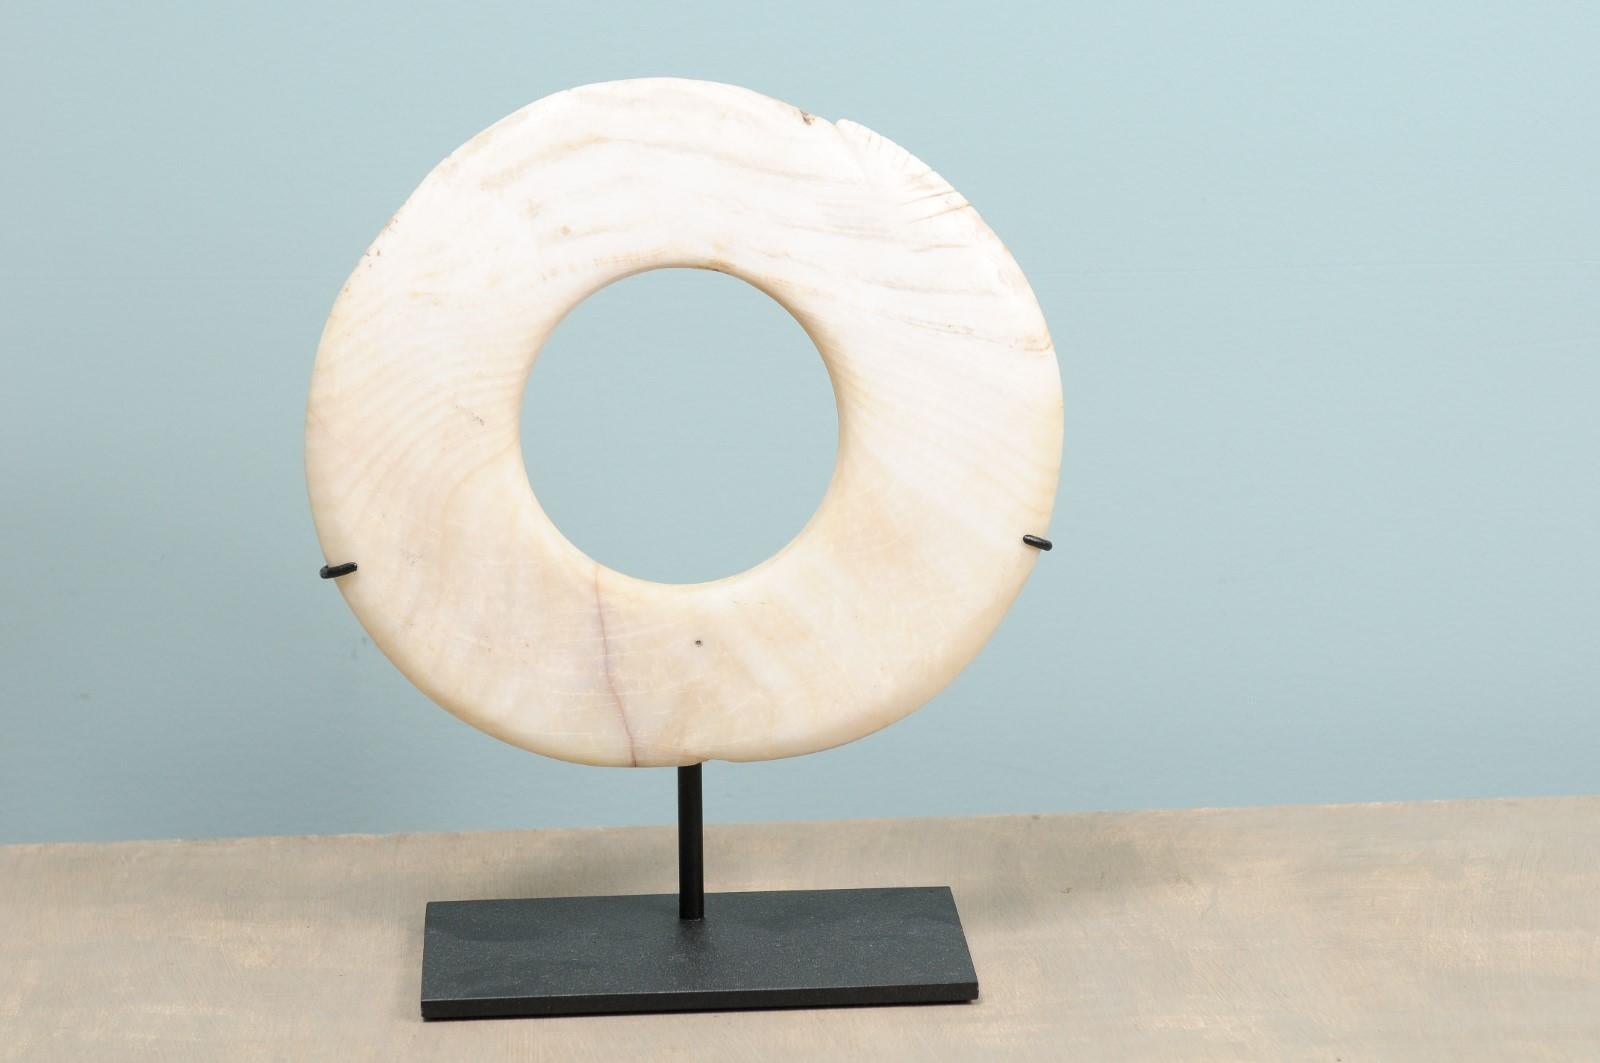 A single Yua Wenga currency from the early 20th century on custom iron stand. This antique tribal currency piece from Papua New Guinea has been carved from a giant clam shell, with pieces of bamboo. Yua means money and Wenga are clam rings. The Yua